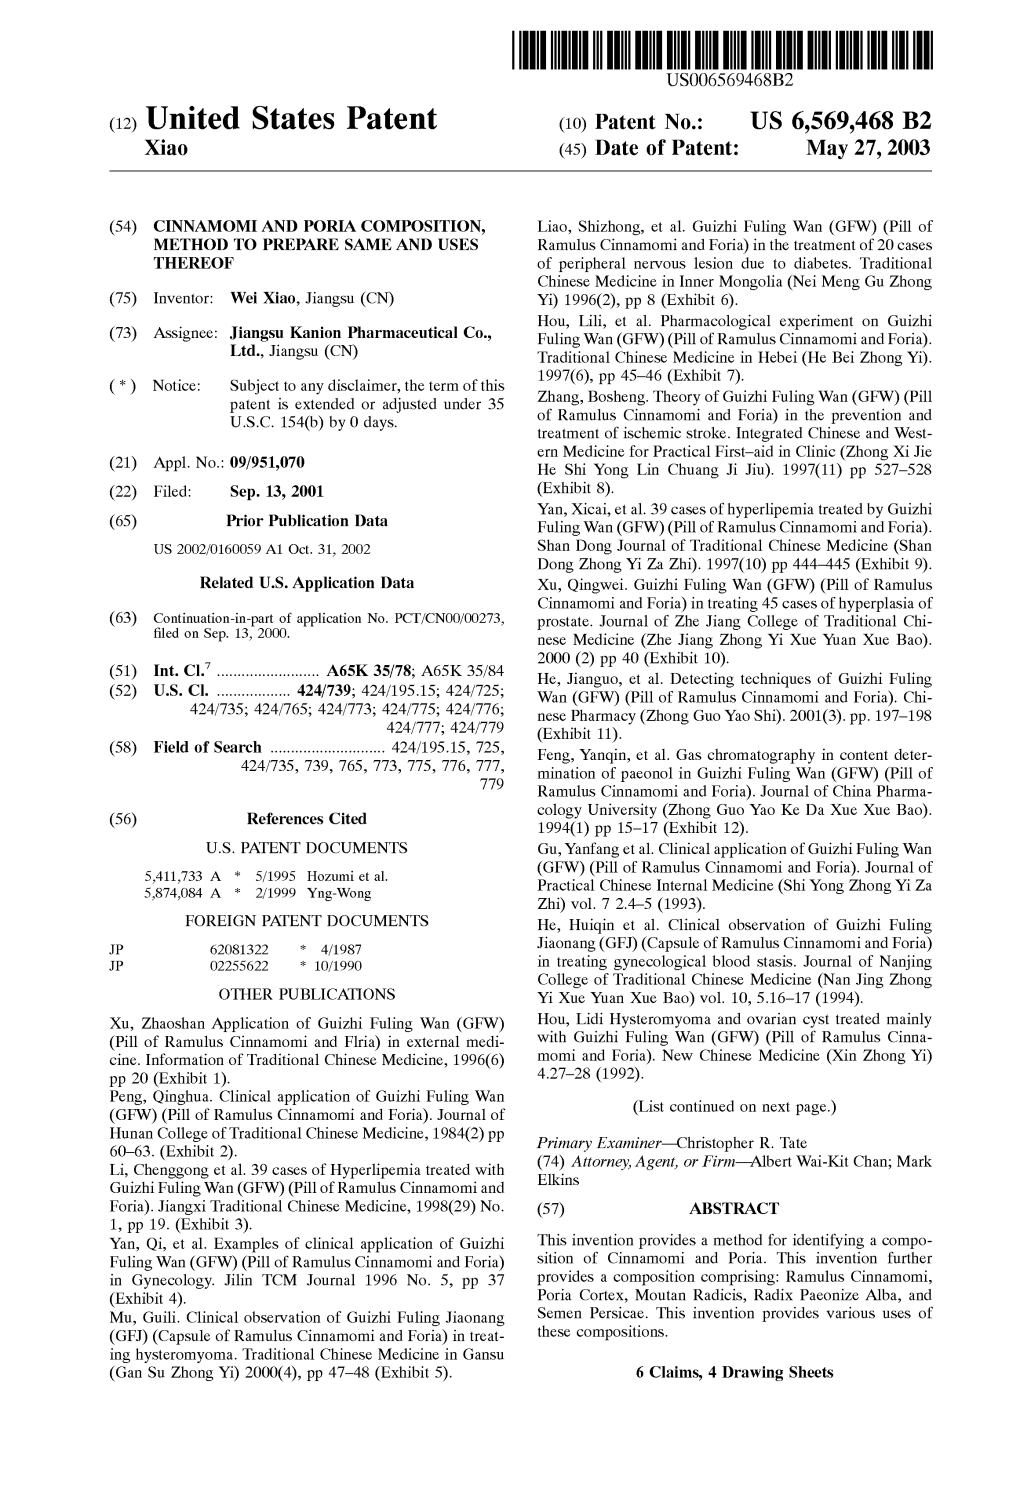 (12) United States Patent (10) Patent No.: US 6,569,468 B2 Xiao (45) Date of Patent: May 27, 2003